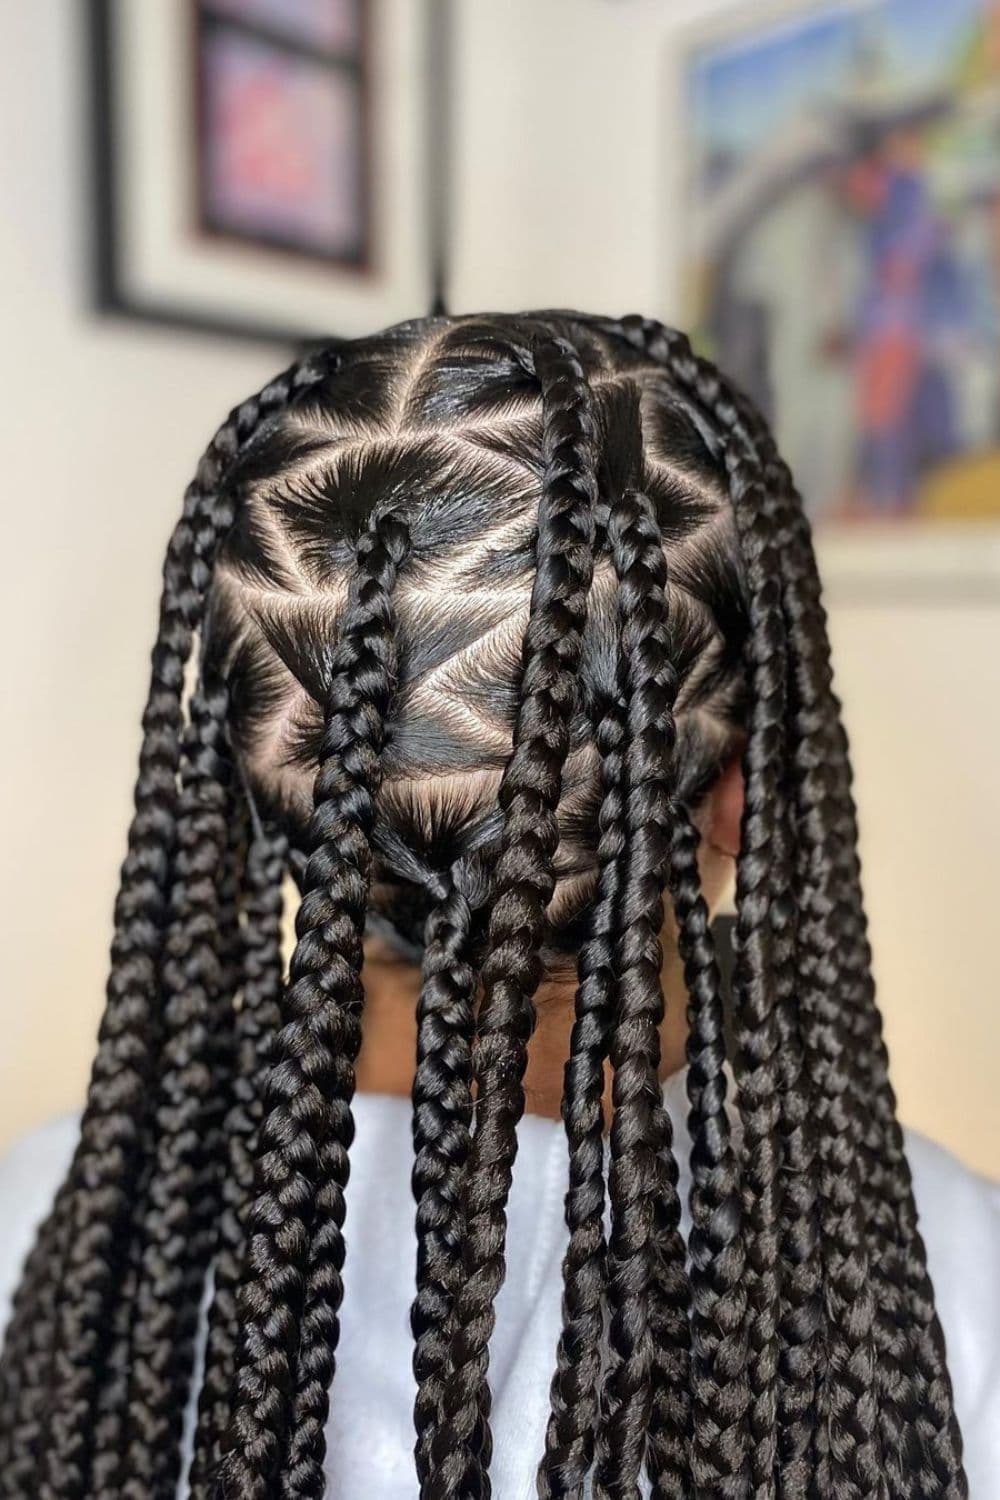 A woman with knotless braids with zigzag parts.